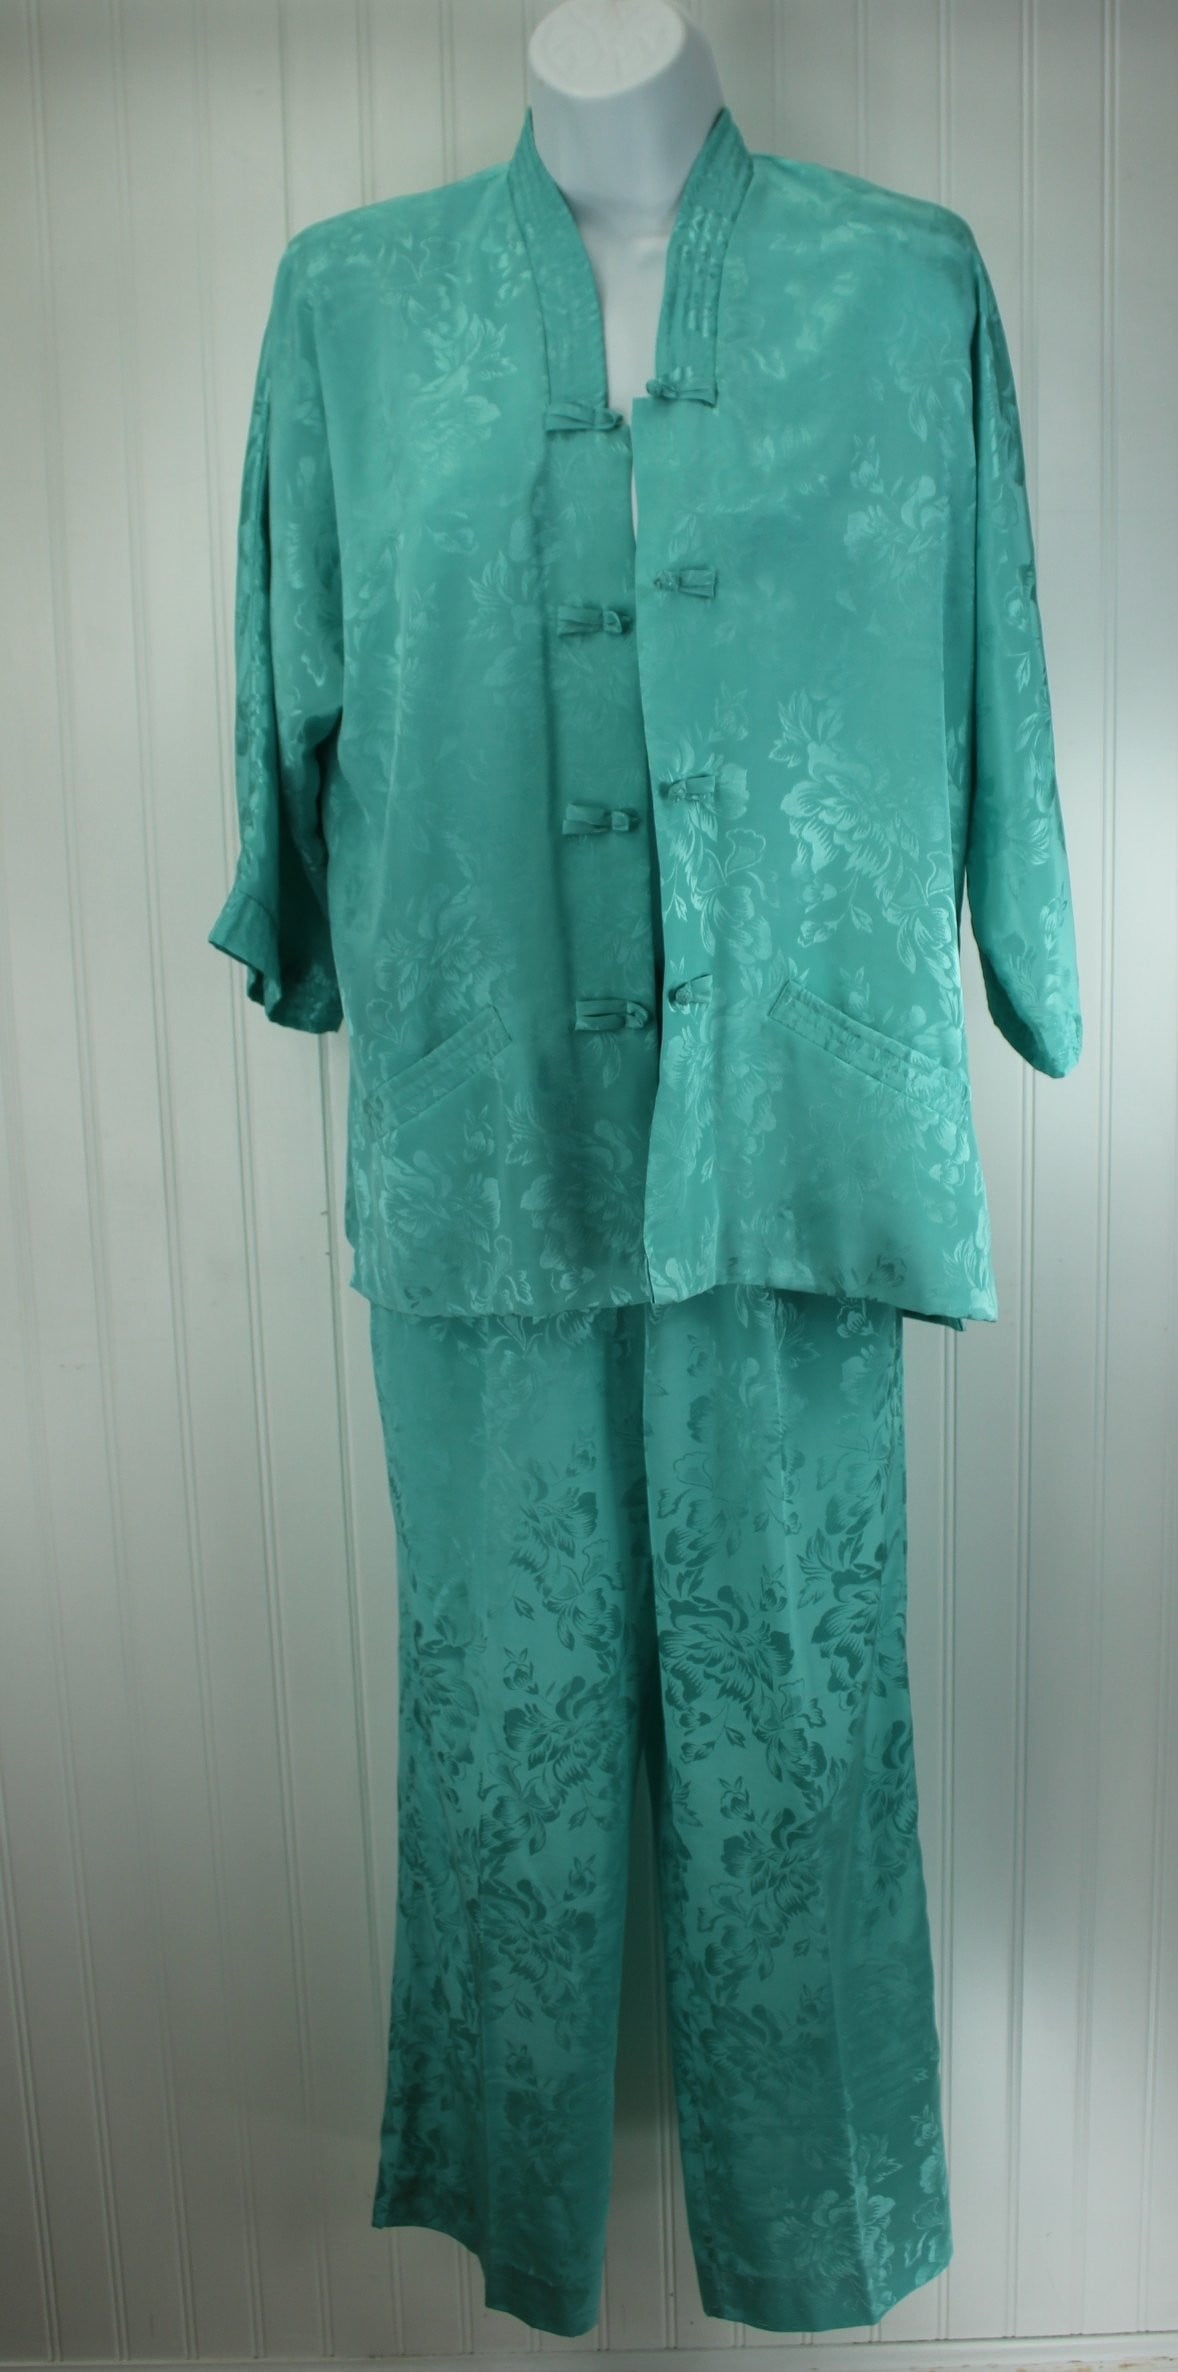 Polynesian Casuals Hawaii Charming Vintage Lounge Pants Suit  - Turquoise Aqua Polyester